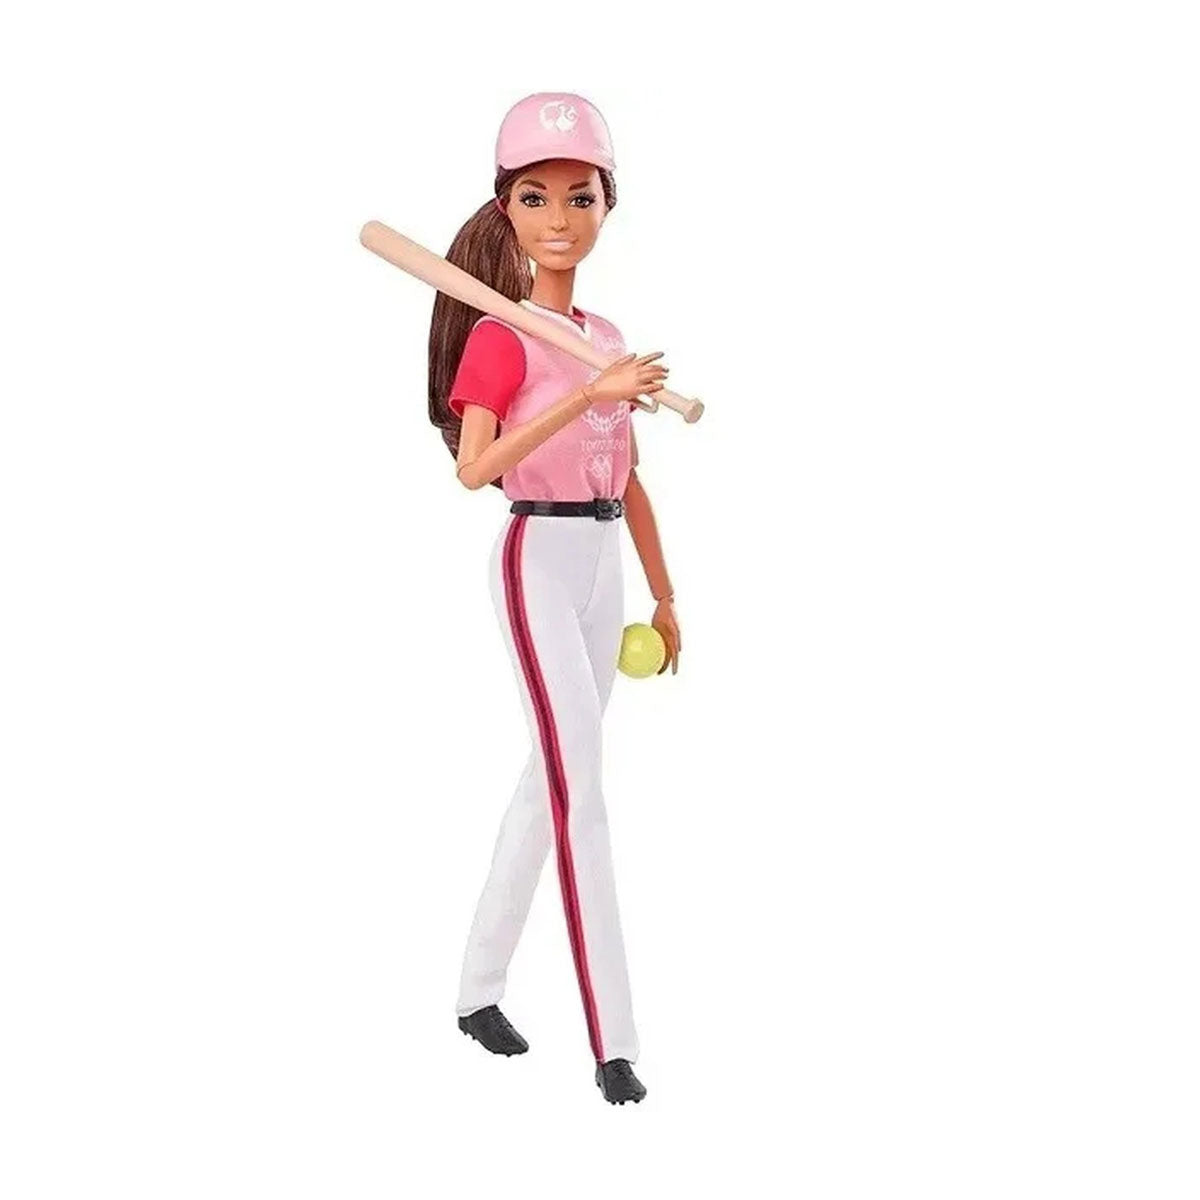 Barbie - Olympic Games Doll (Styles Vary - One Suppiled)